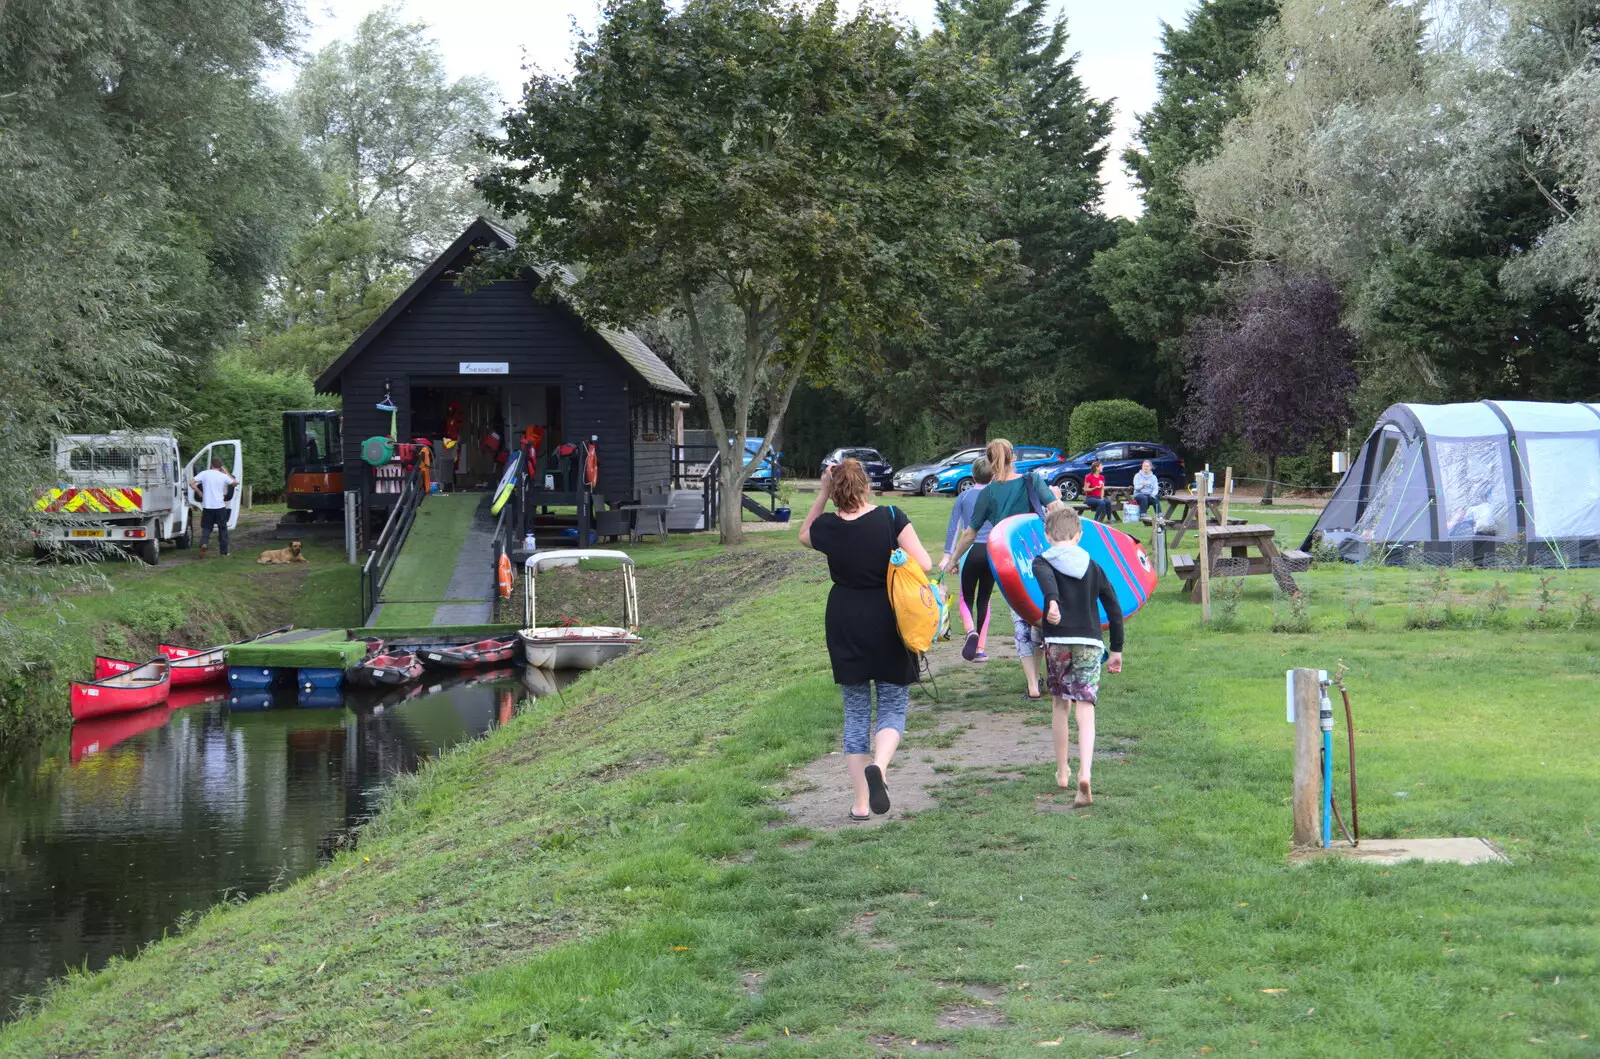 We head off to the boat hire shed, from Camping at Three Rivers, Geldeston, Norfolk - 5th September 2020